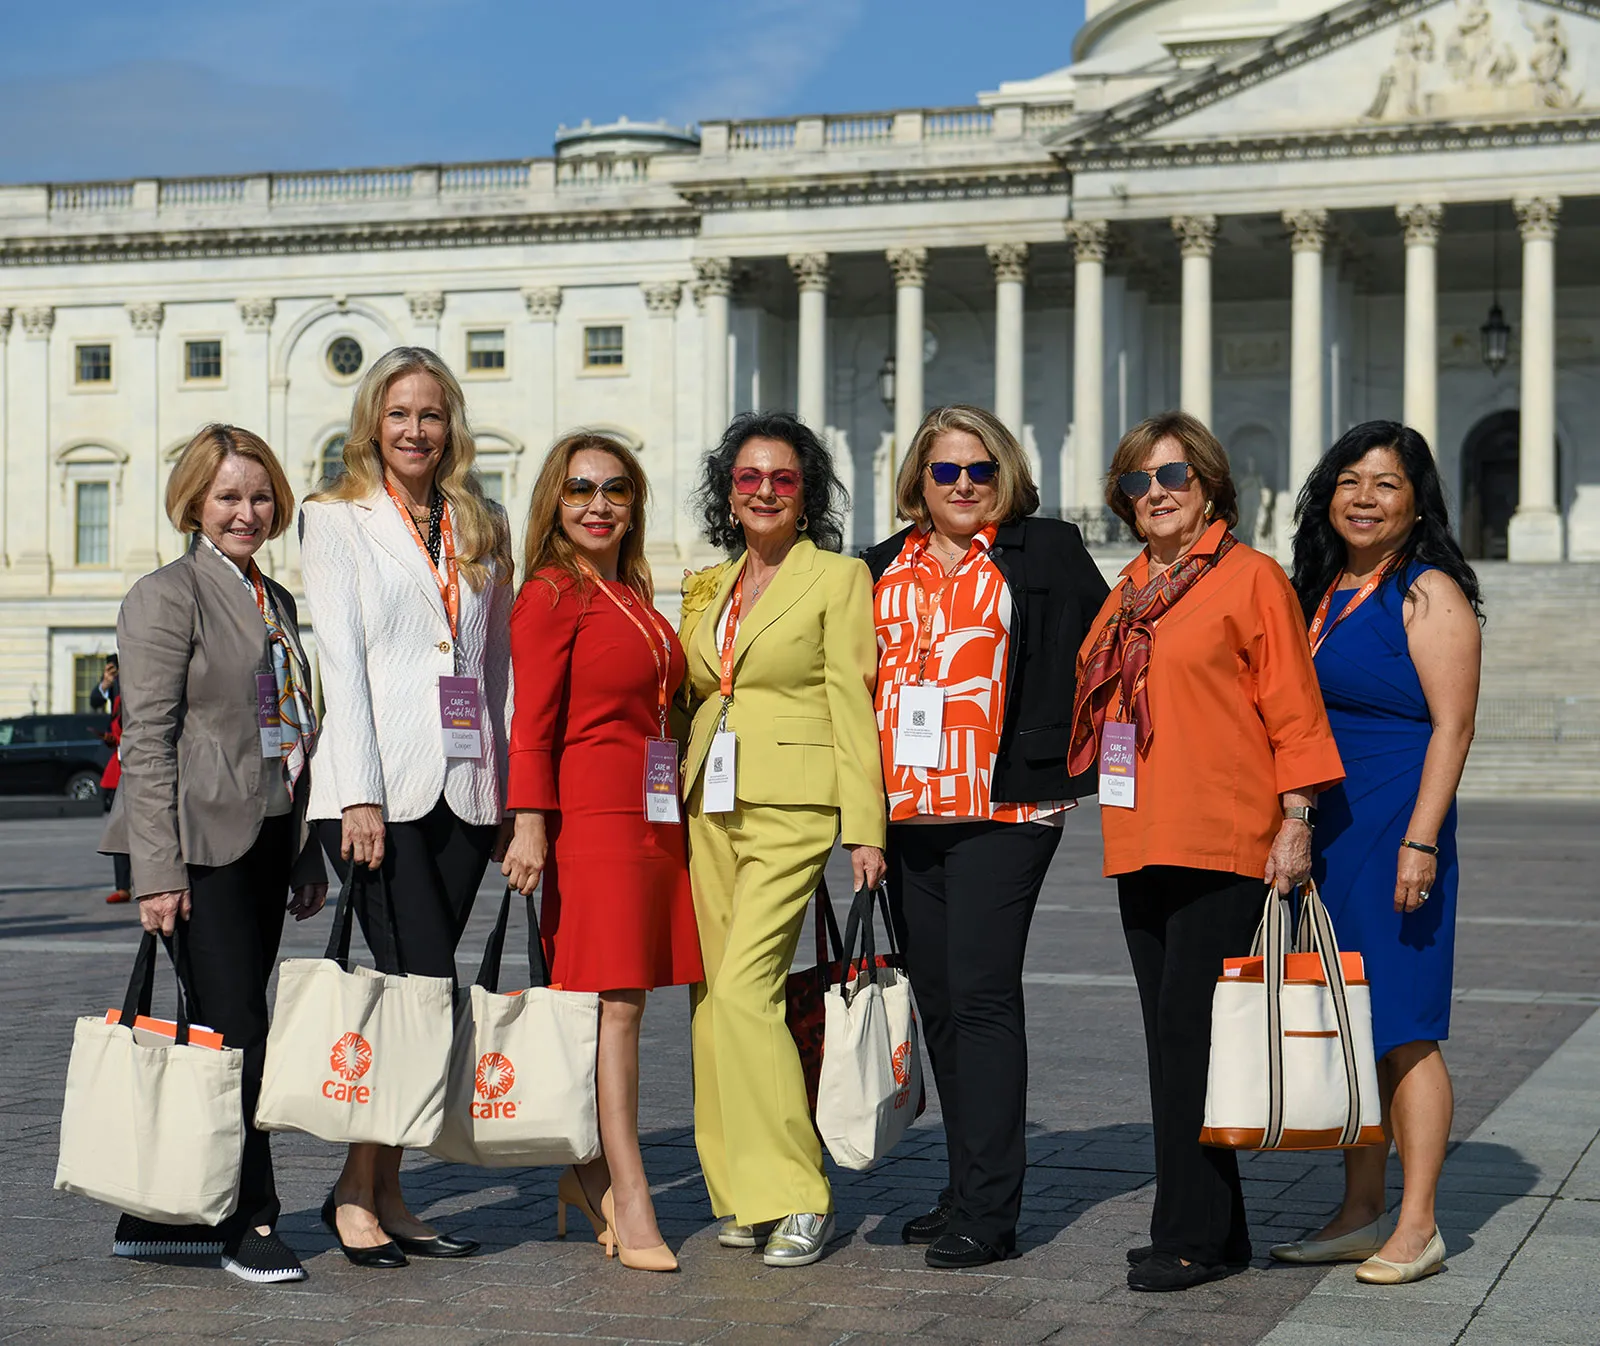 A group of women, many of whom are wearing orange or carrying CARE tote bags, stand together in front of the U.S. Capitol Building in Washington, DC.